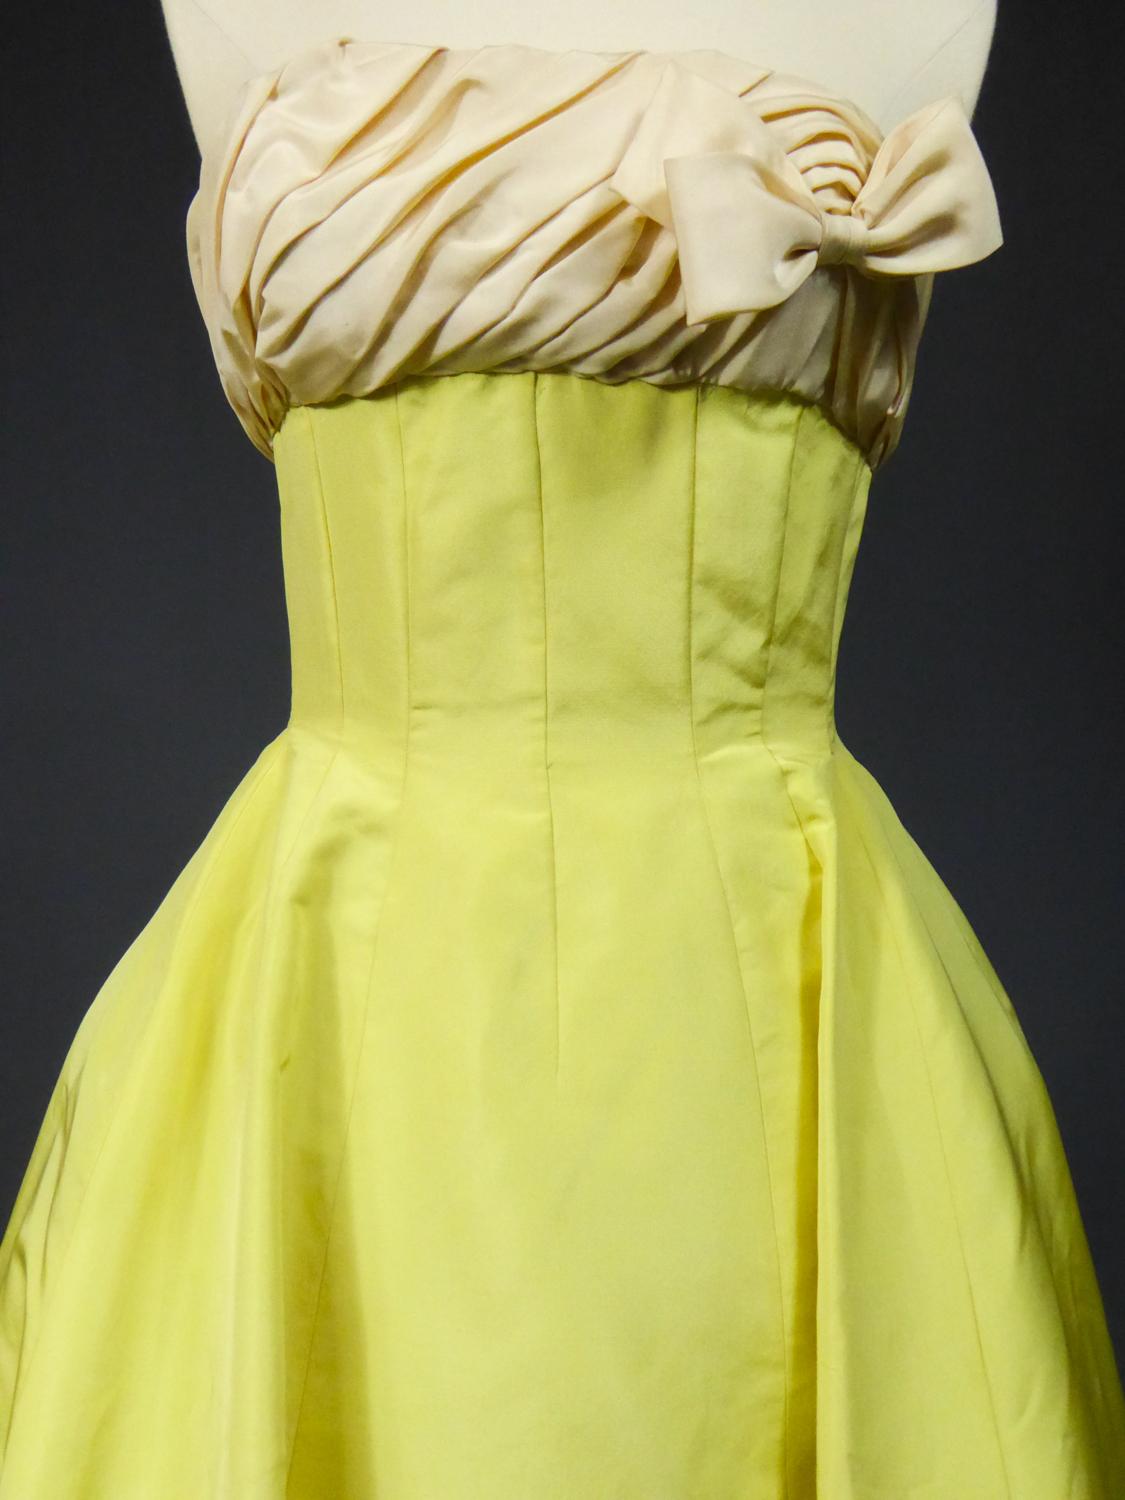 Circa 1958

France

A yellow banana ottoman silk faille ball-gown or ceremonial long dress. Boned bodice with large plunge neckline and cream oblique pleated shape faille on the chest adorned with a side knot. High waist effect obtained by a high